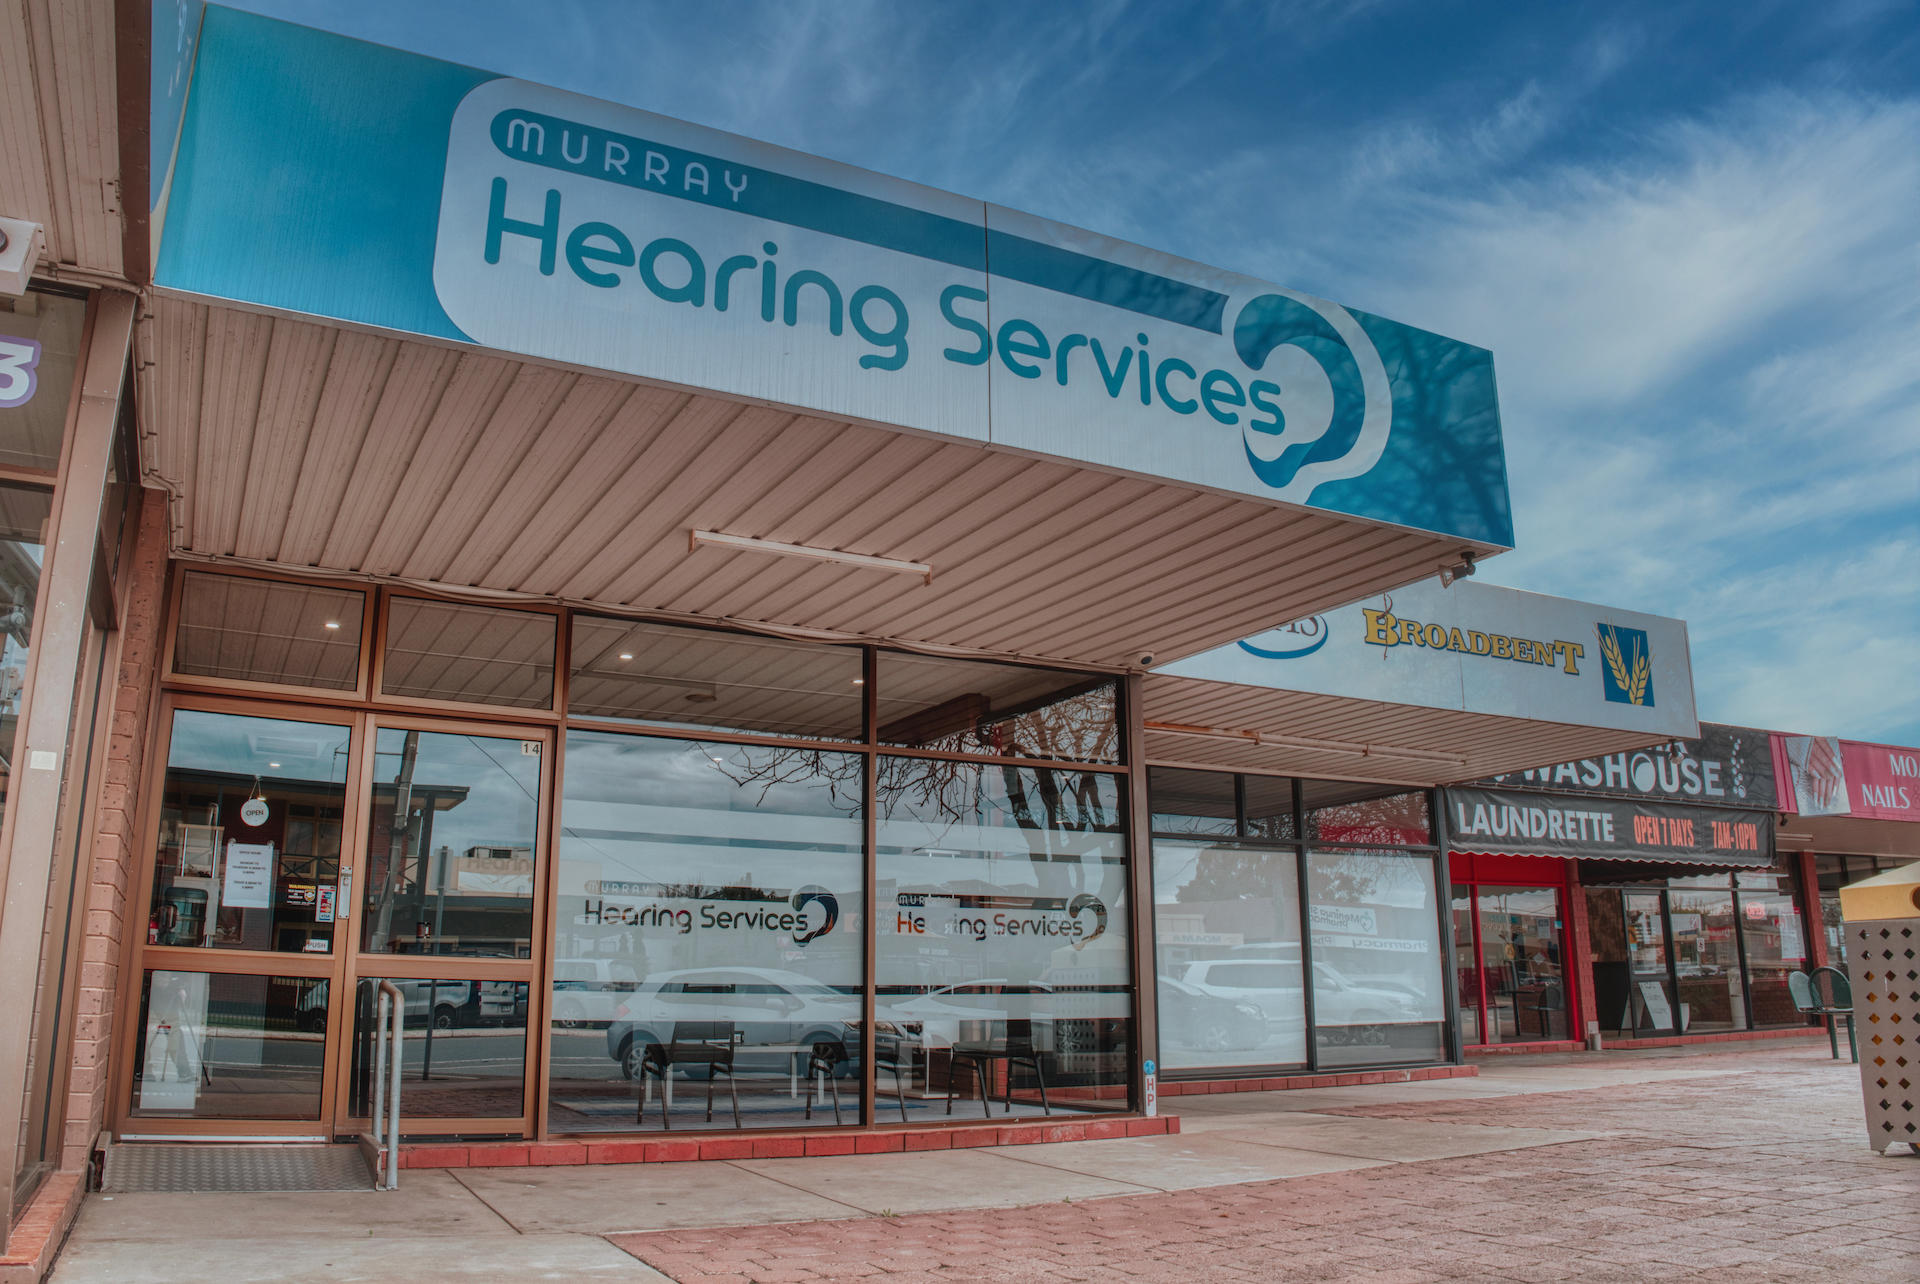 Images Murray Hearing Services